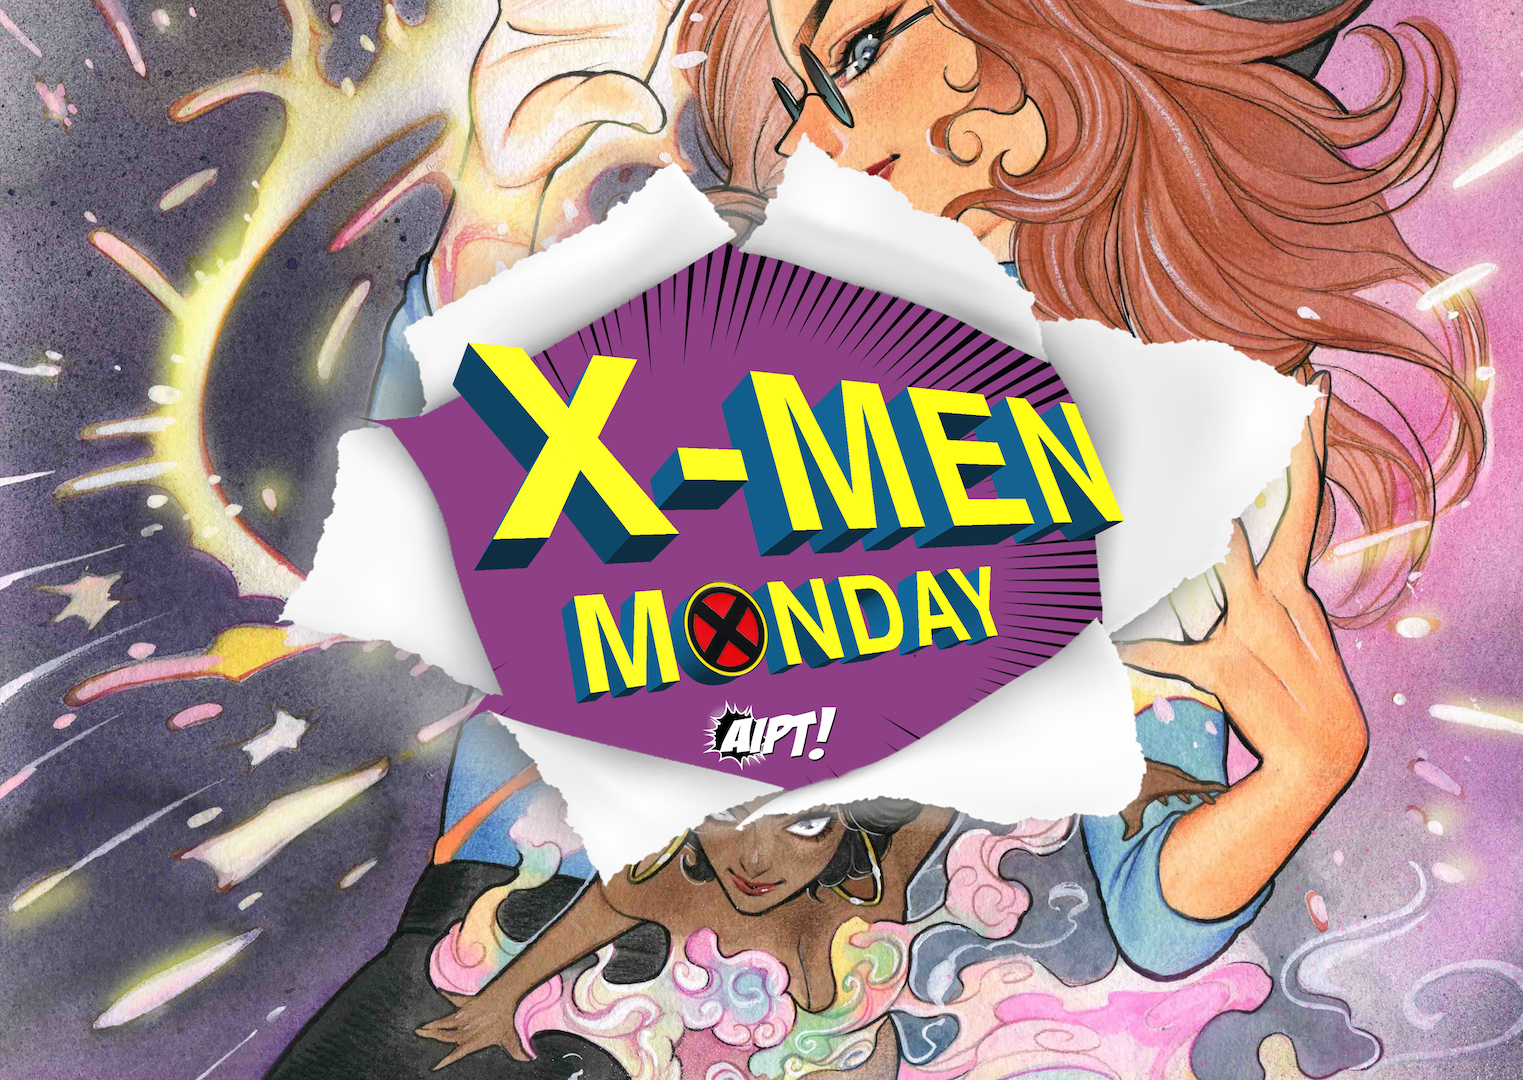 X-Men Monday #7 - X-Deaths, sexy mutants, and Cyclops and Jean Grey's marriage